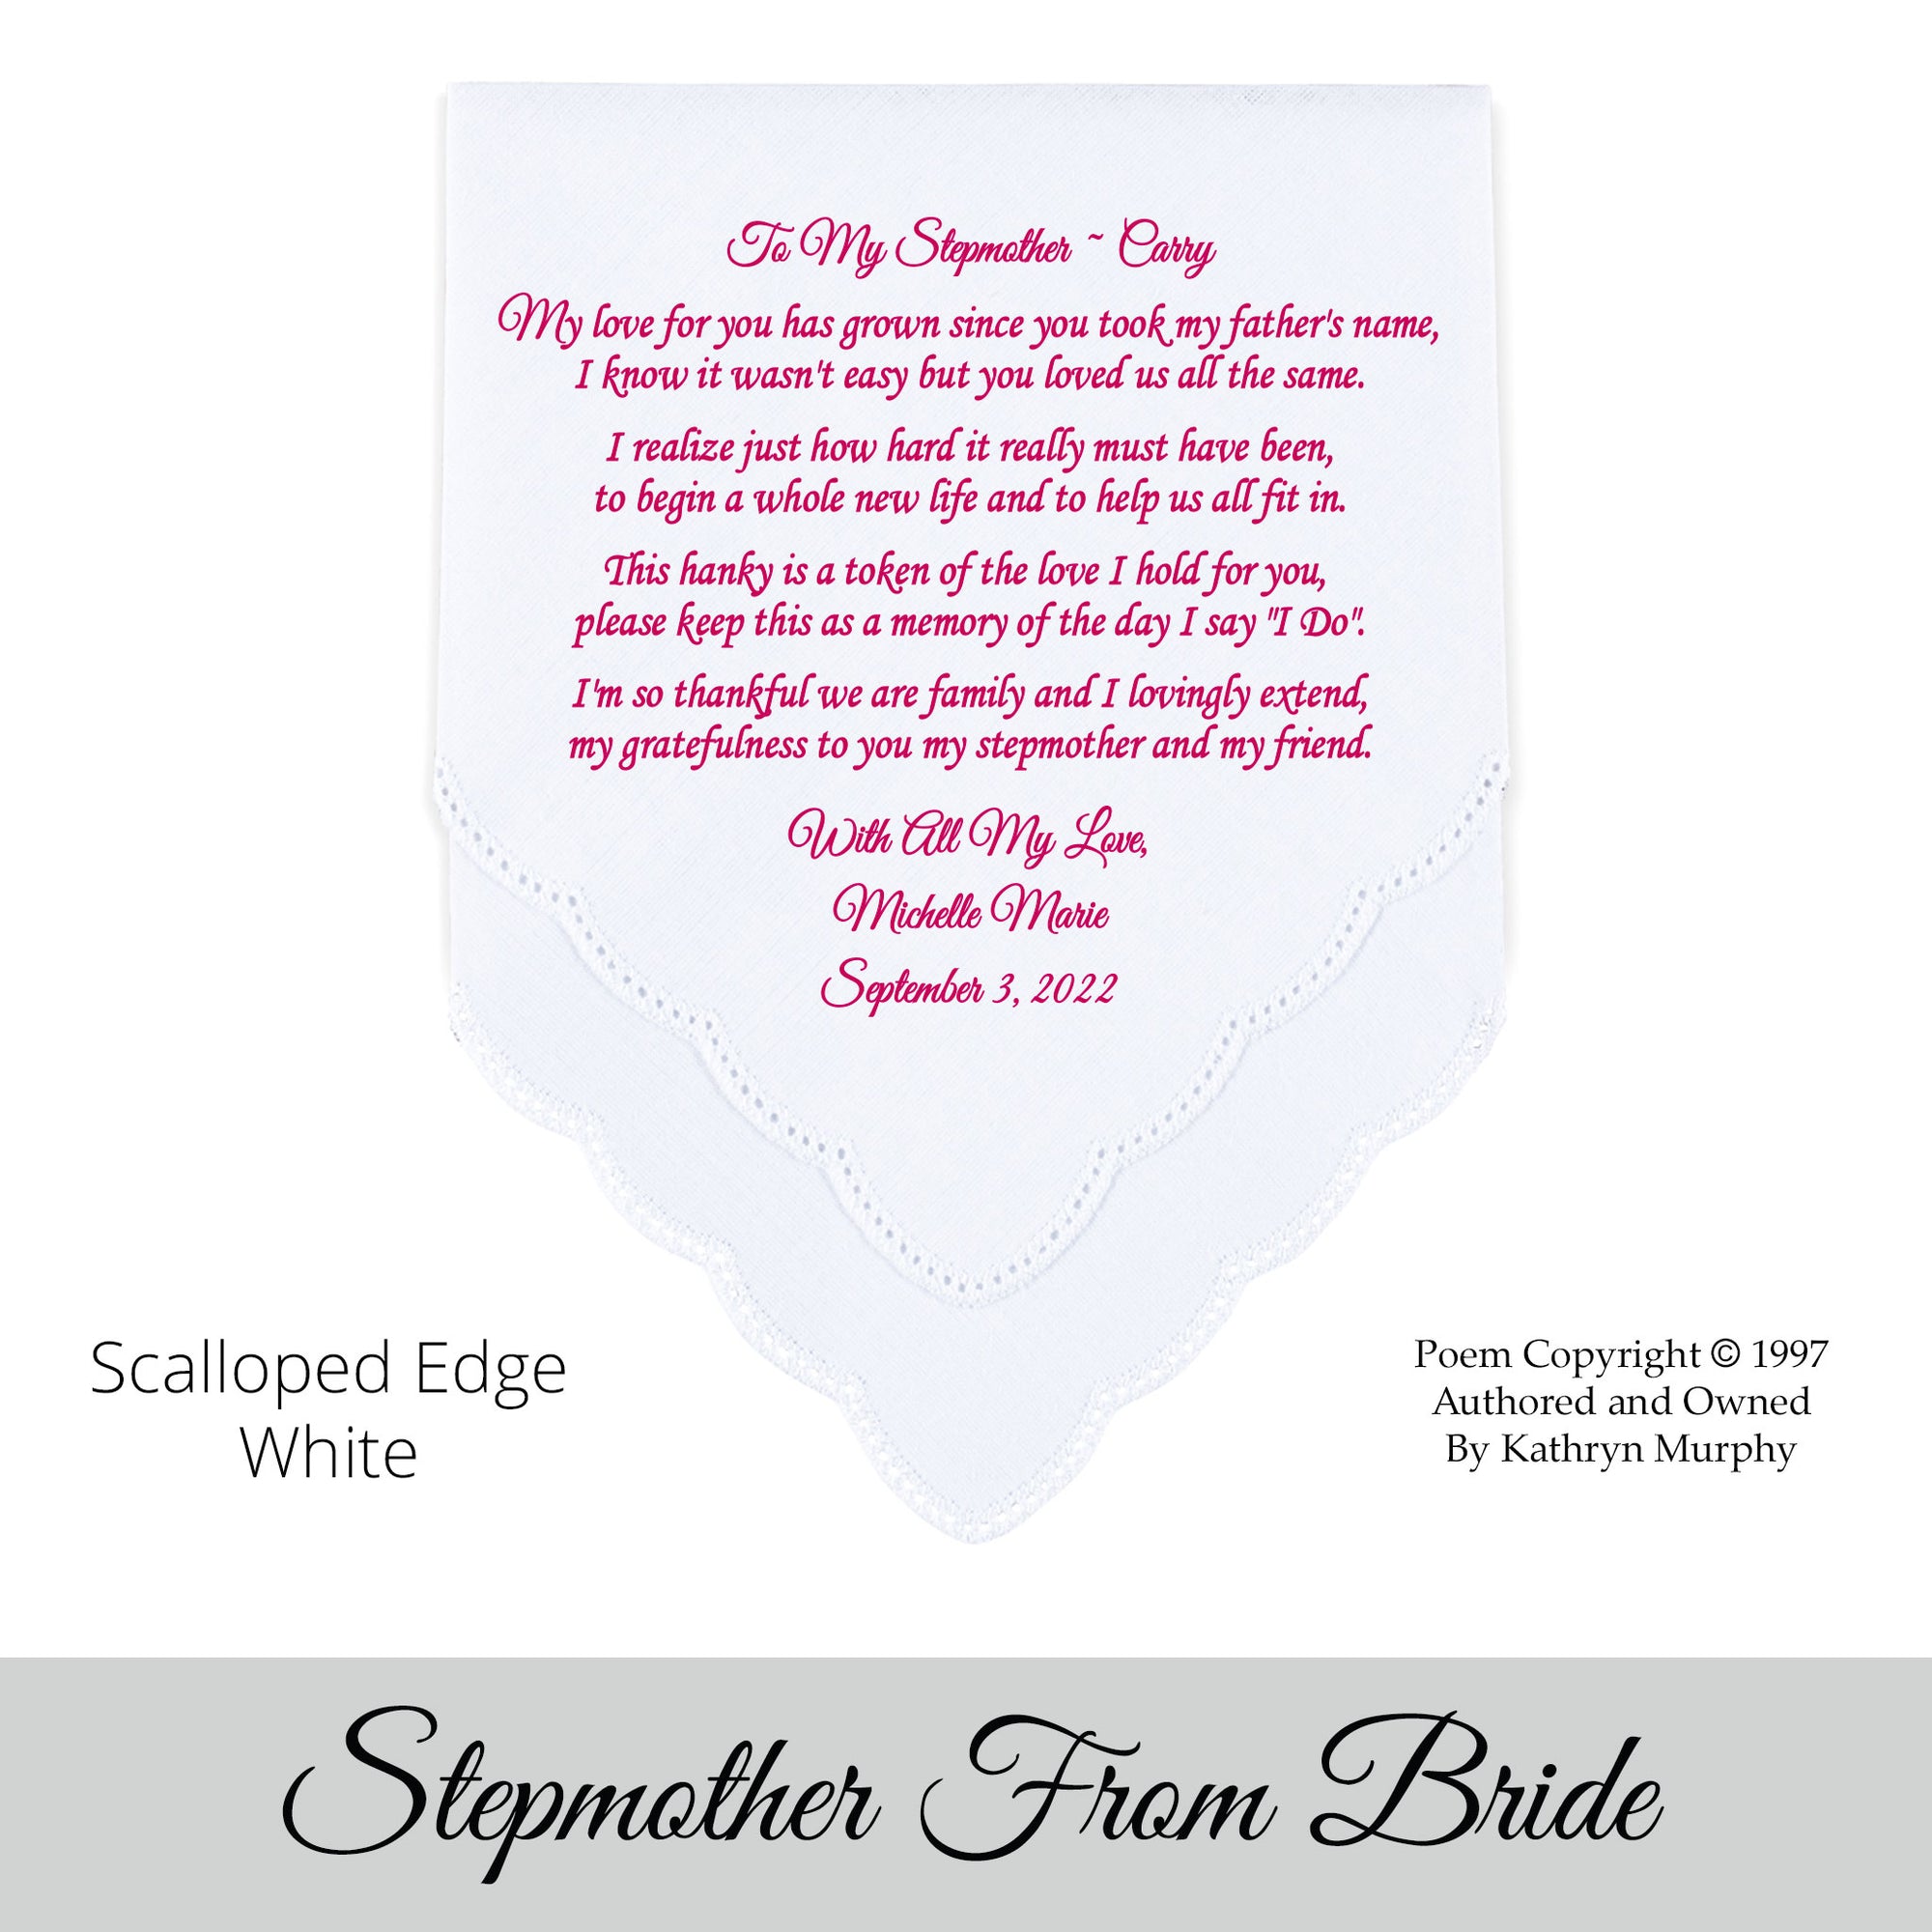 gift for the stepmother of the bride. Wedding Hankie with printed poem